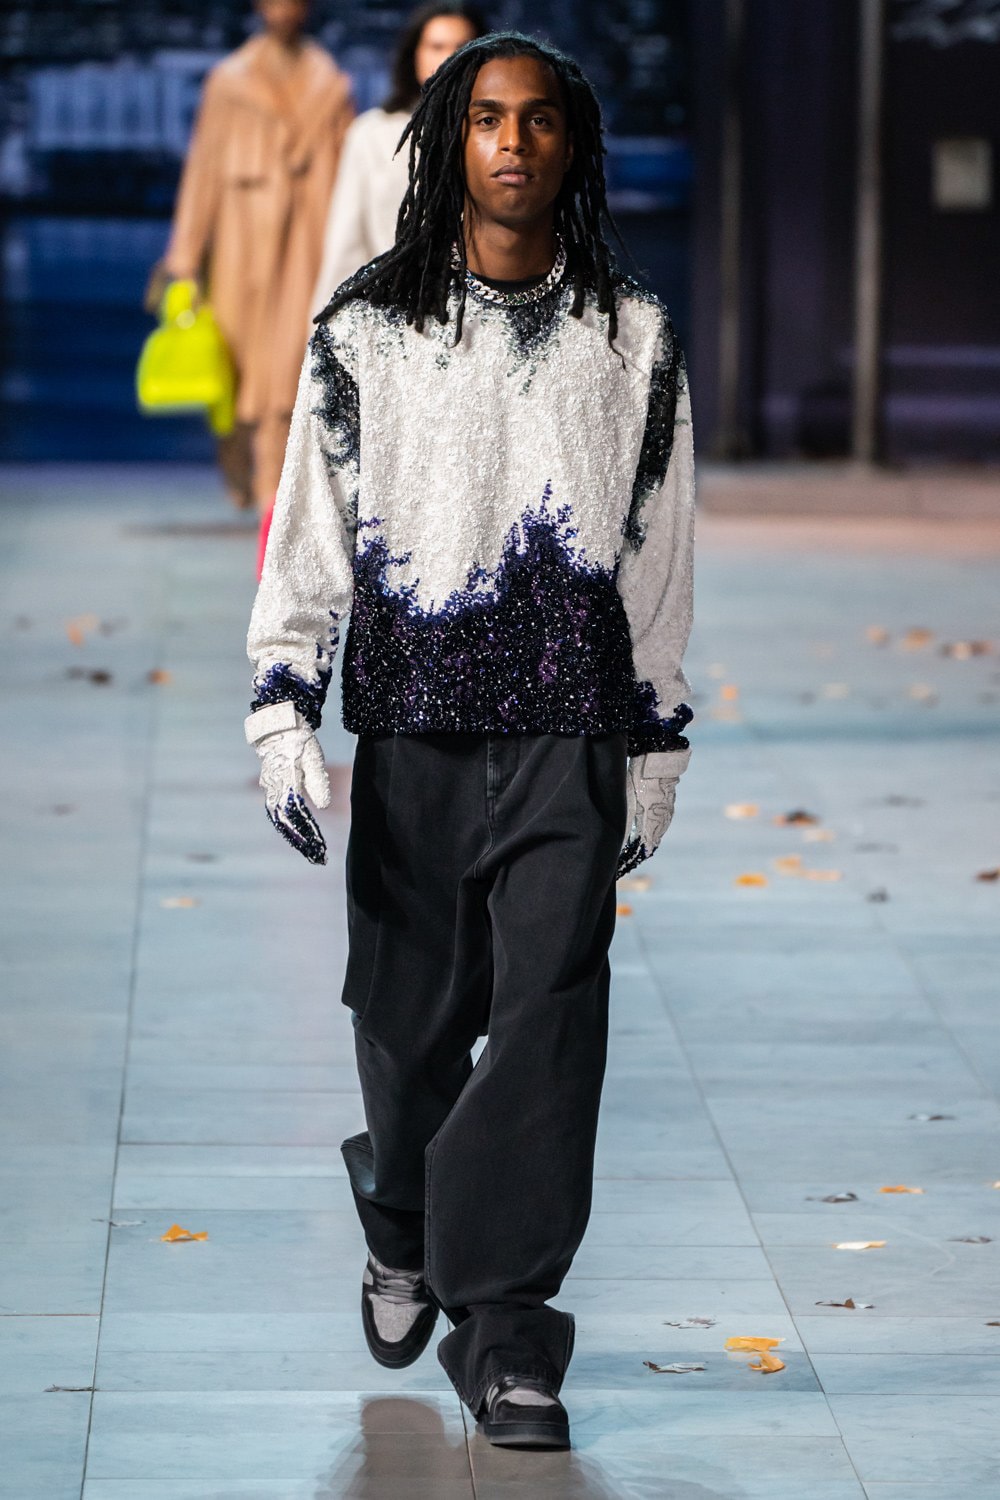 Louis Vuitton drop Michael Jackson clothes from new collection